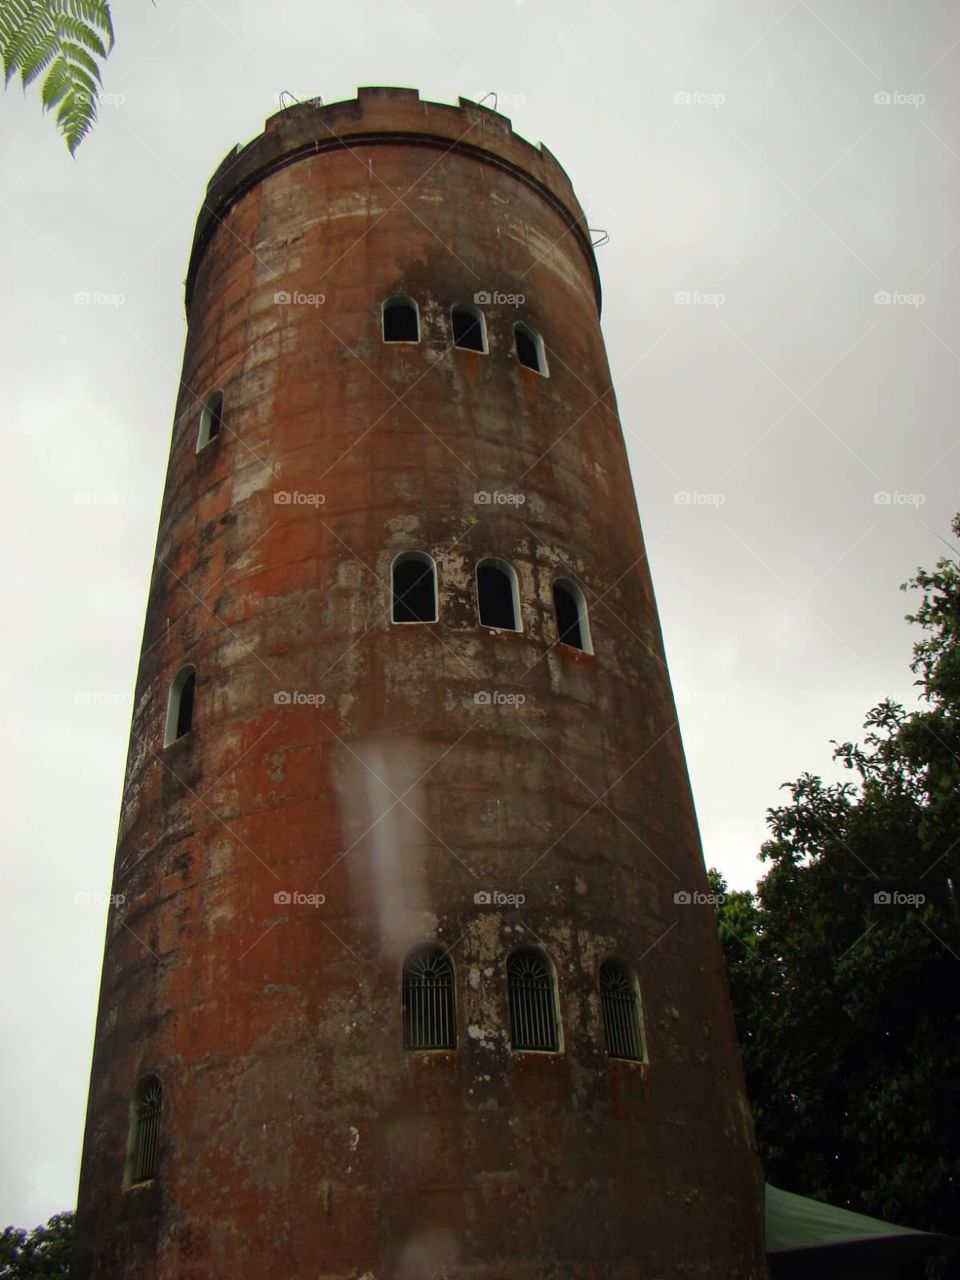 Old tower. Old tower located in a rain forest in Puerto Rico